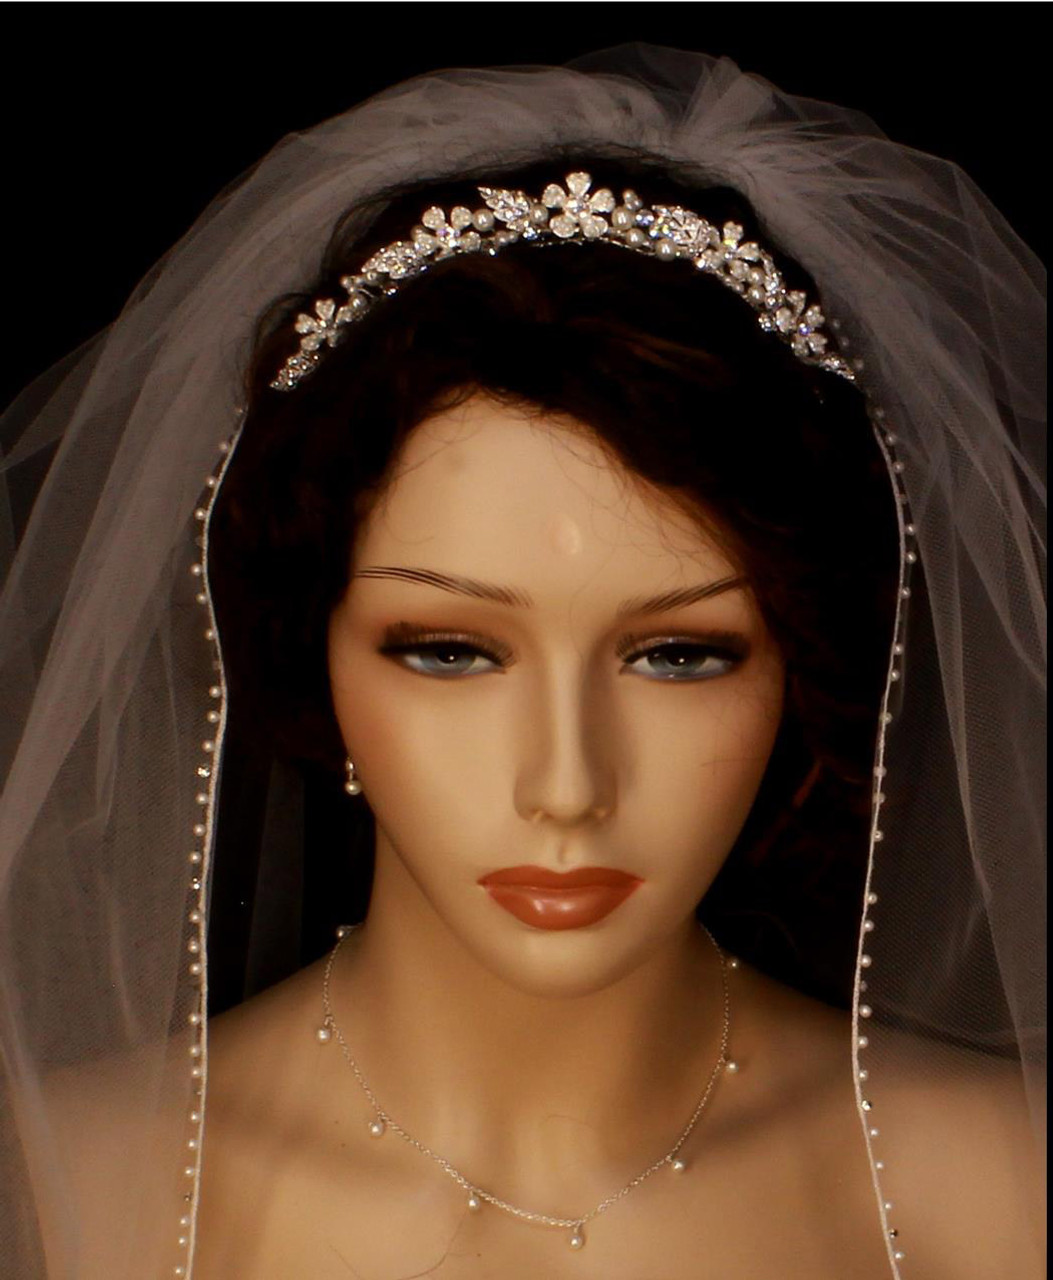 36 inches - Mariells Rhinestone Edge Fingertip Wedding Veil with Pearls,  Beads & Crystals - Ivory 3327V-I